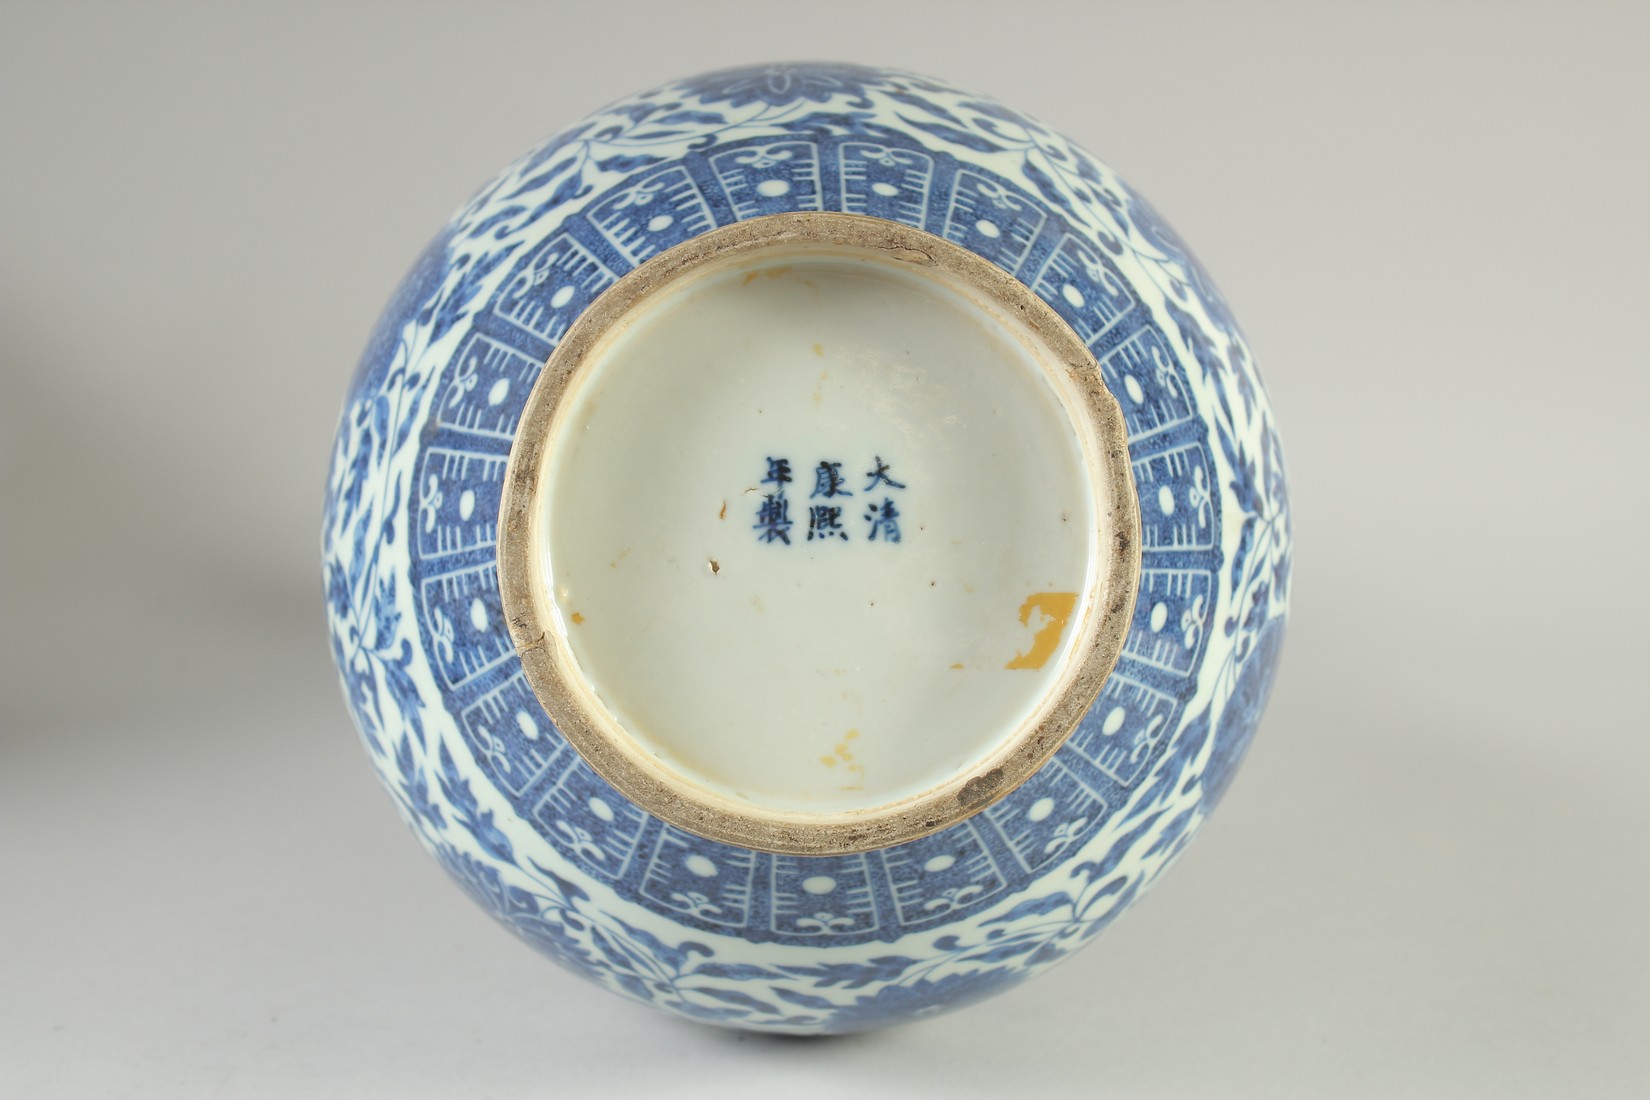 A LARGE 19TH CENTURY CHINESE BLUE AND WHITE PORCELAIN VASE, painted with bands of floral motifs with - Image 6 of 7